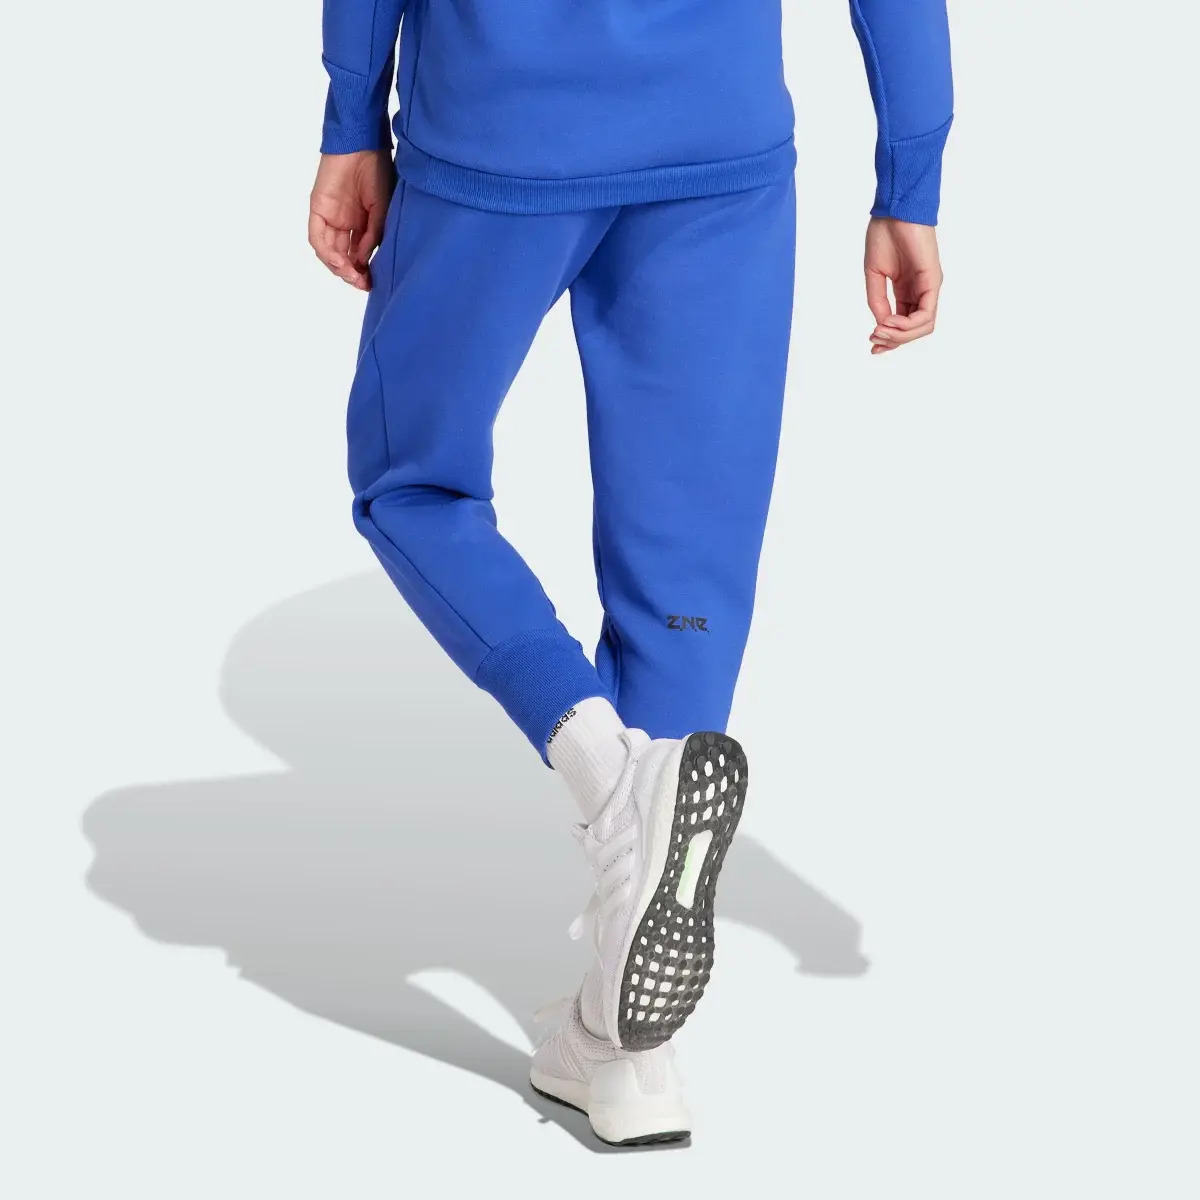 Adidas Z.N.E. Tracksuit Bottoms. 2